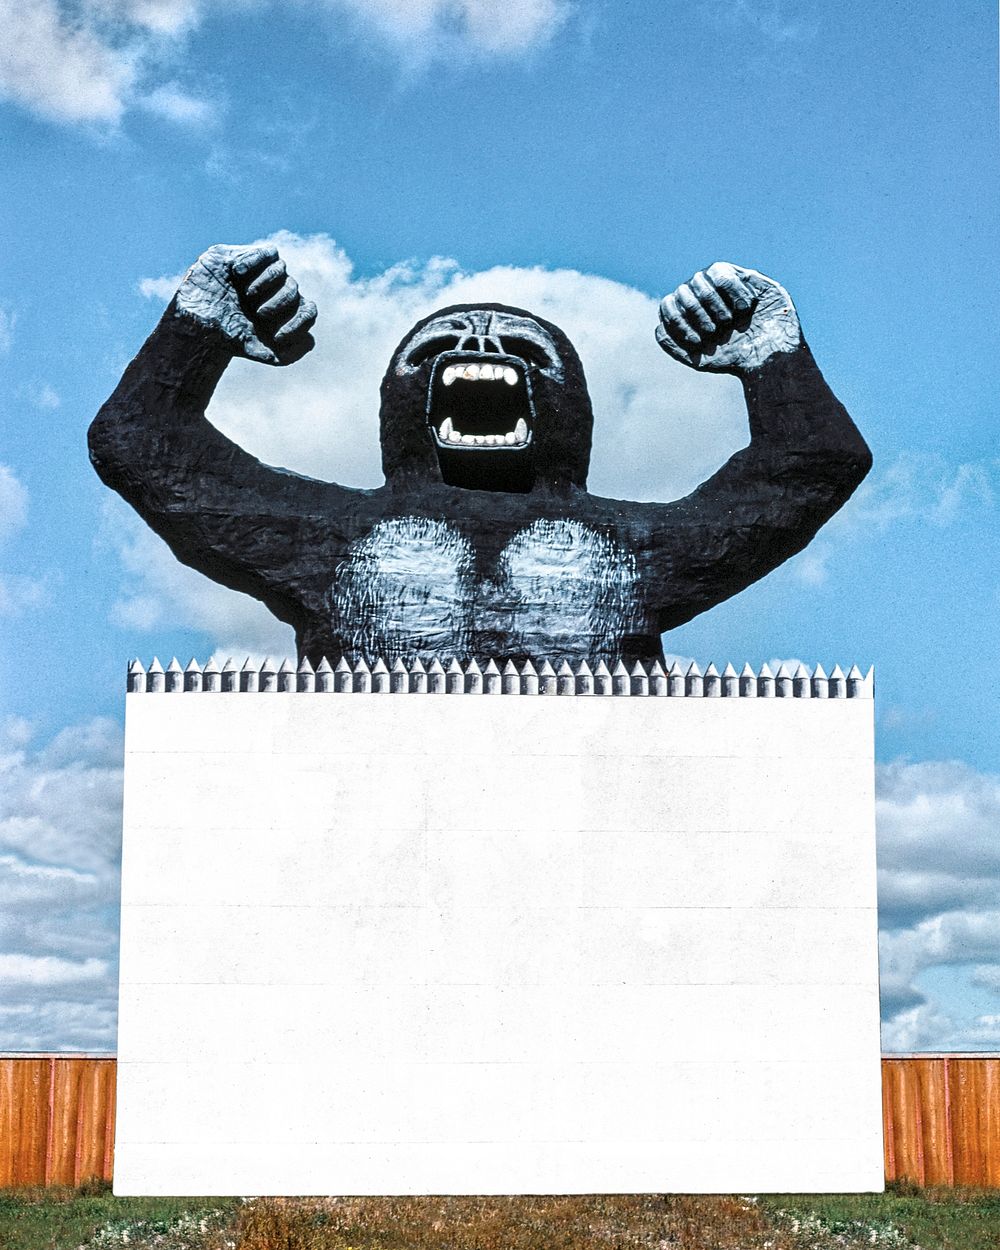 Blank billboard psd mockup with gorilla, remixed from artworks by John Margolies